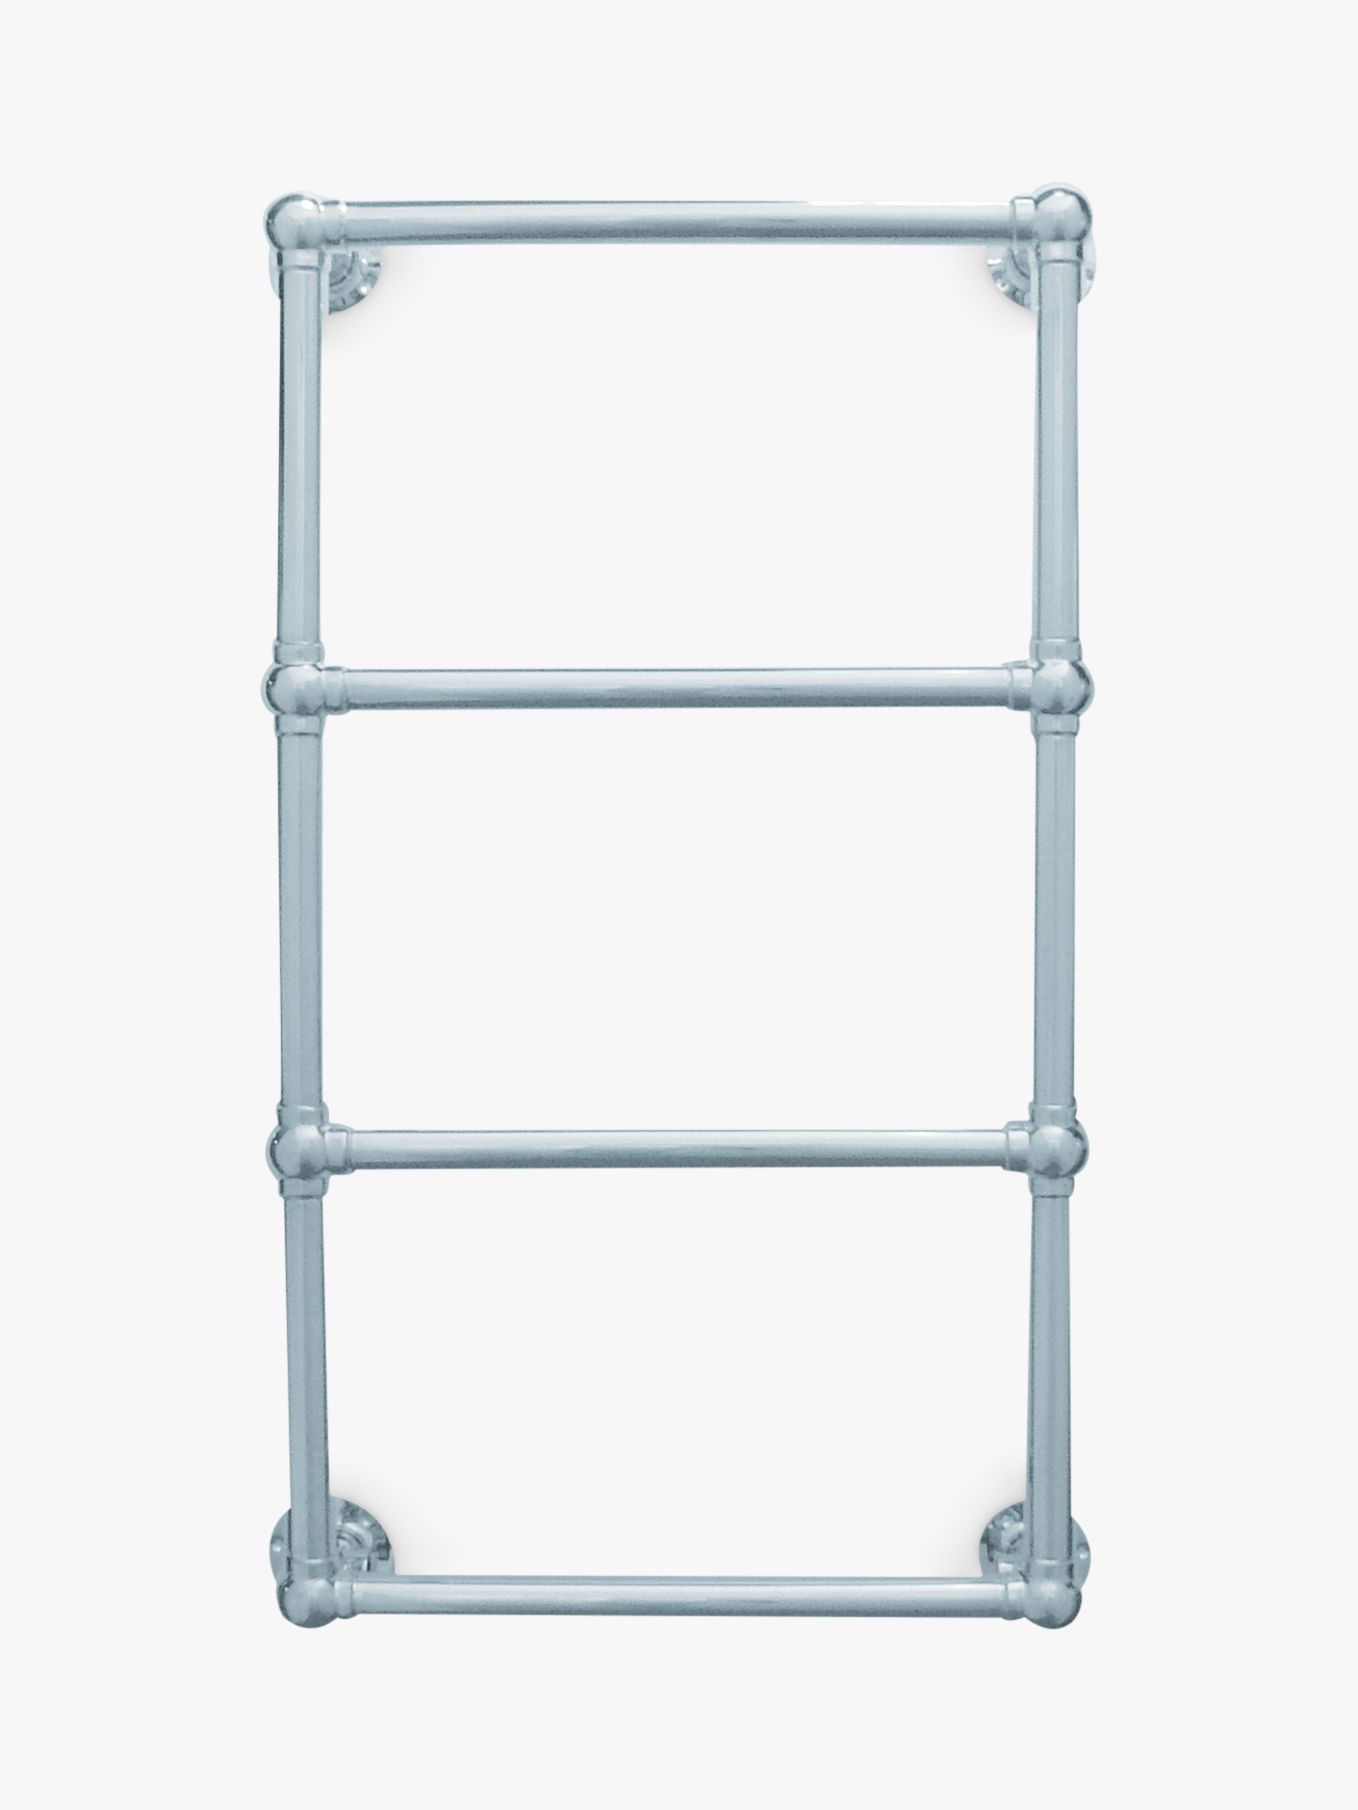 John Lewis & Partners Seagrove Dual Fuel Heated Towel Rail and Valves, from the Wall